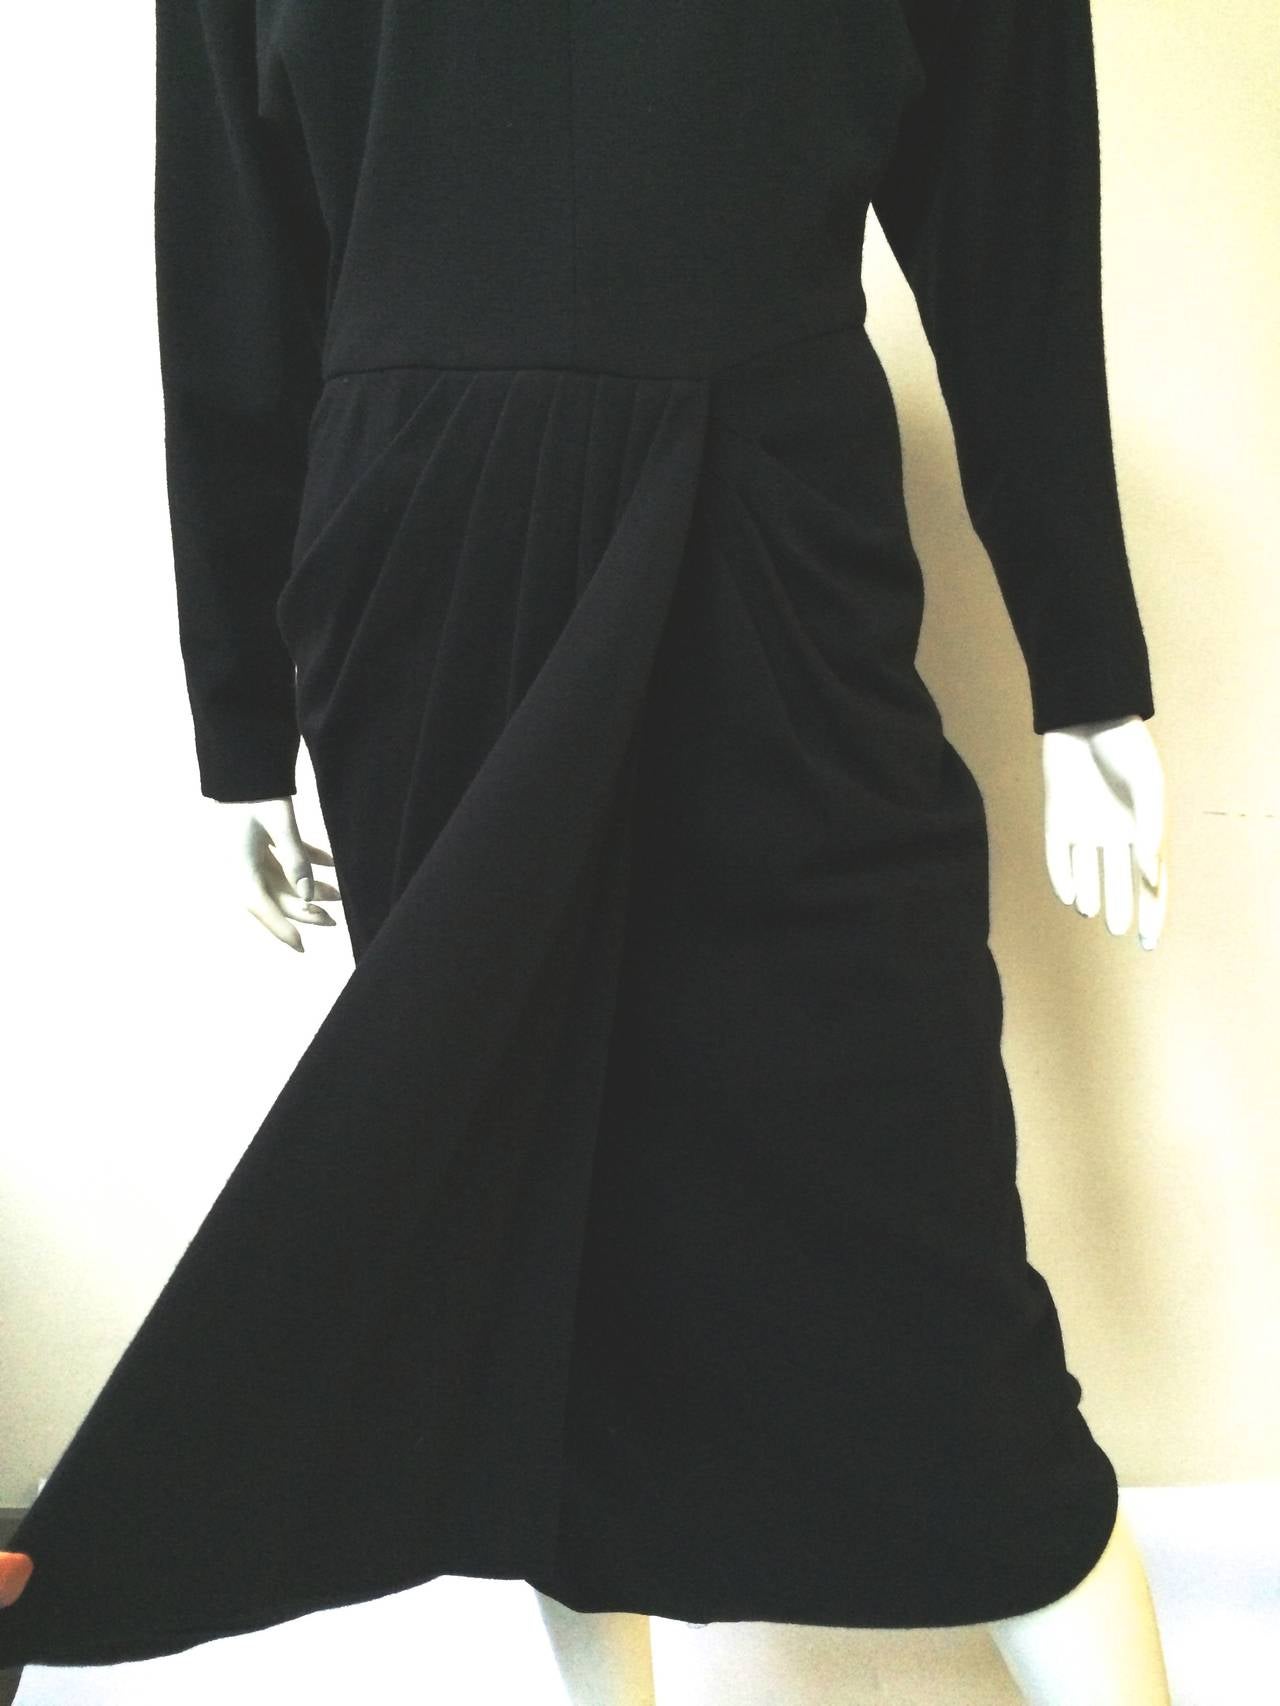  Dior 1980s Black Wool Knit Dress Size 6. In Good Condition For Sale In Atlanta, GA